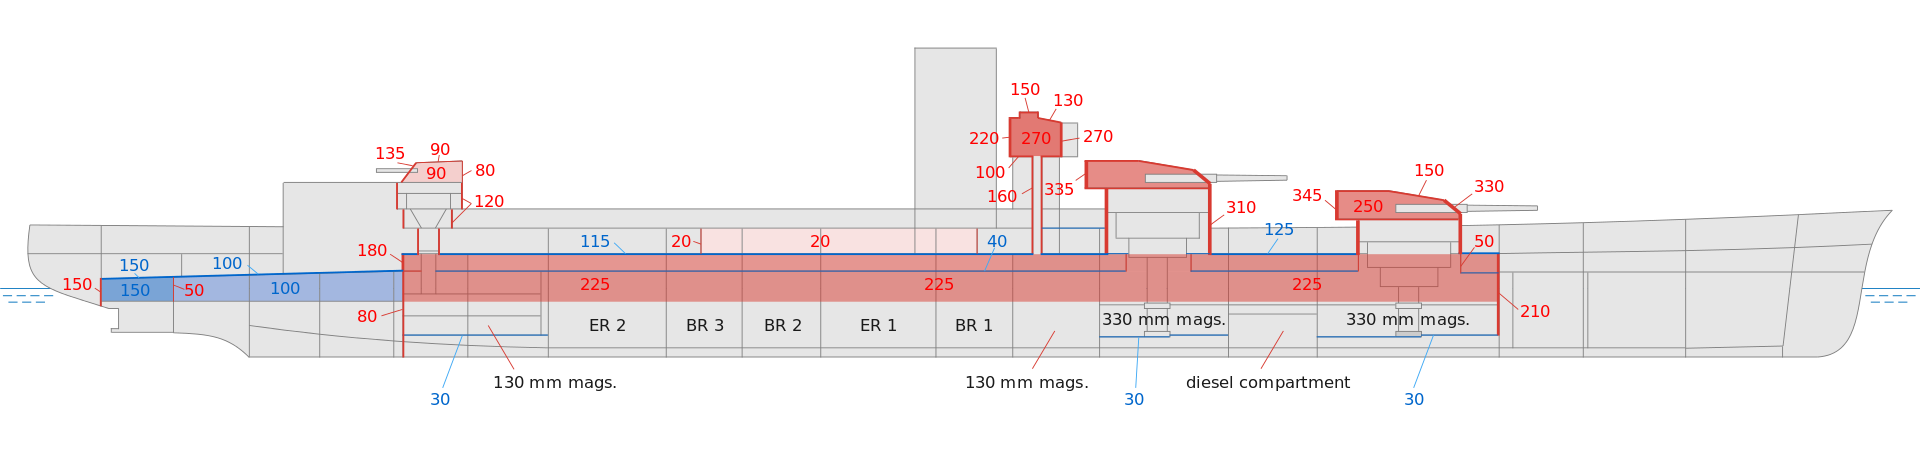 dunkerque_class_profile3.png